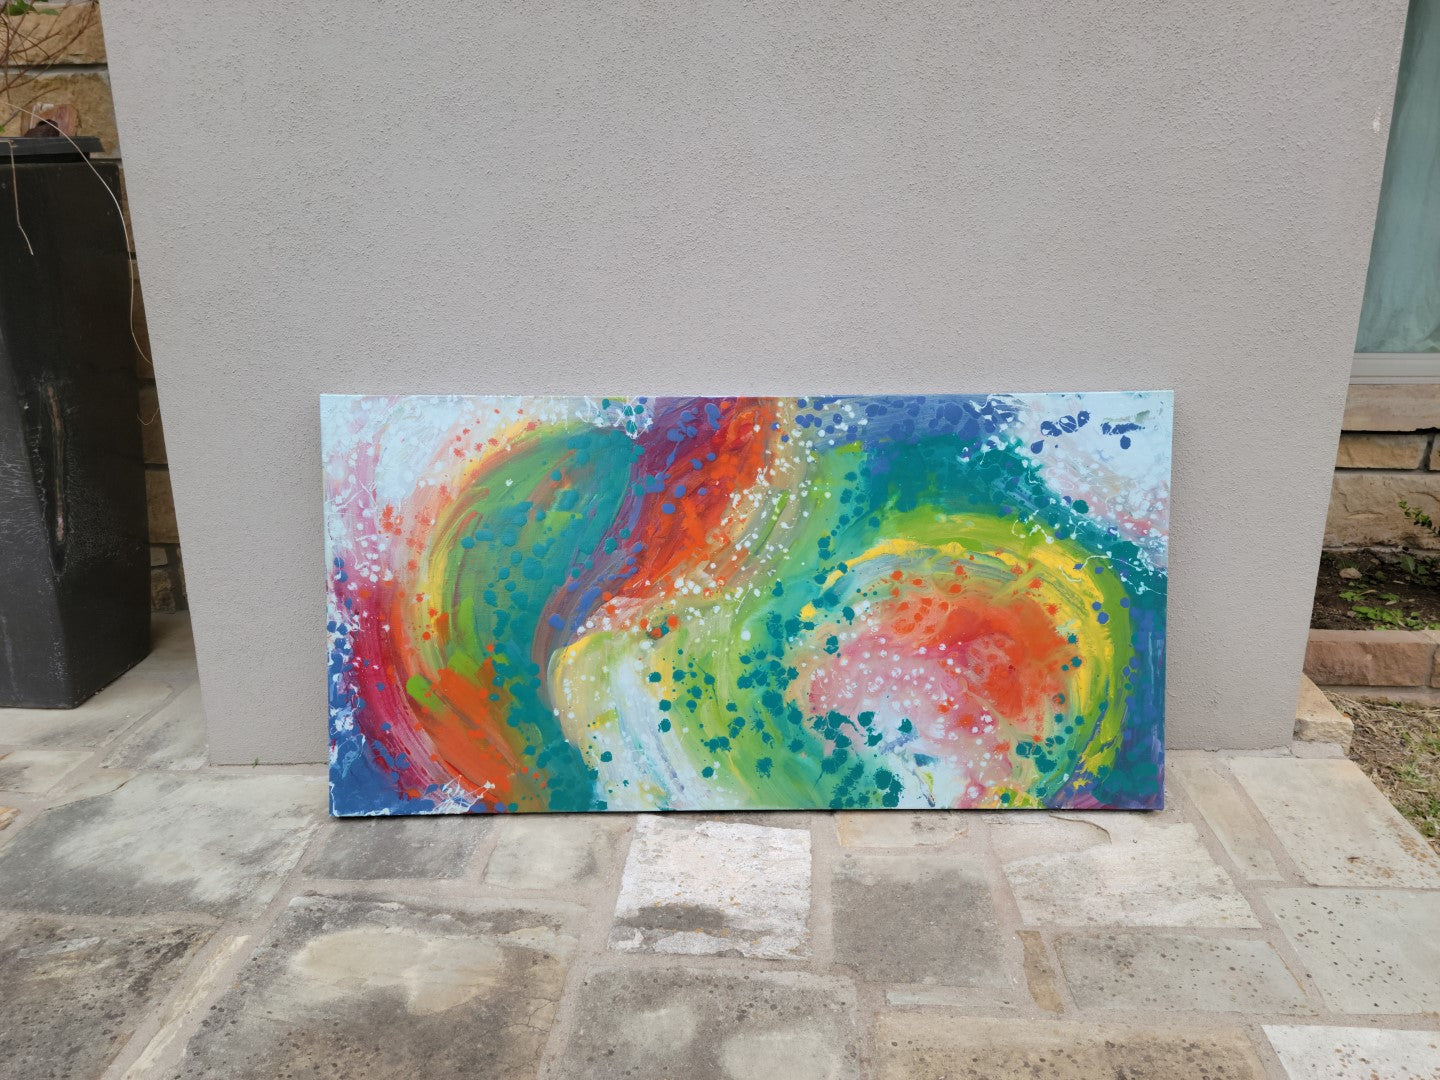 Fantastic Voyage - Original Abstract Painting in Austin Texas 24" x 48"